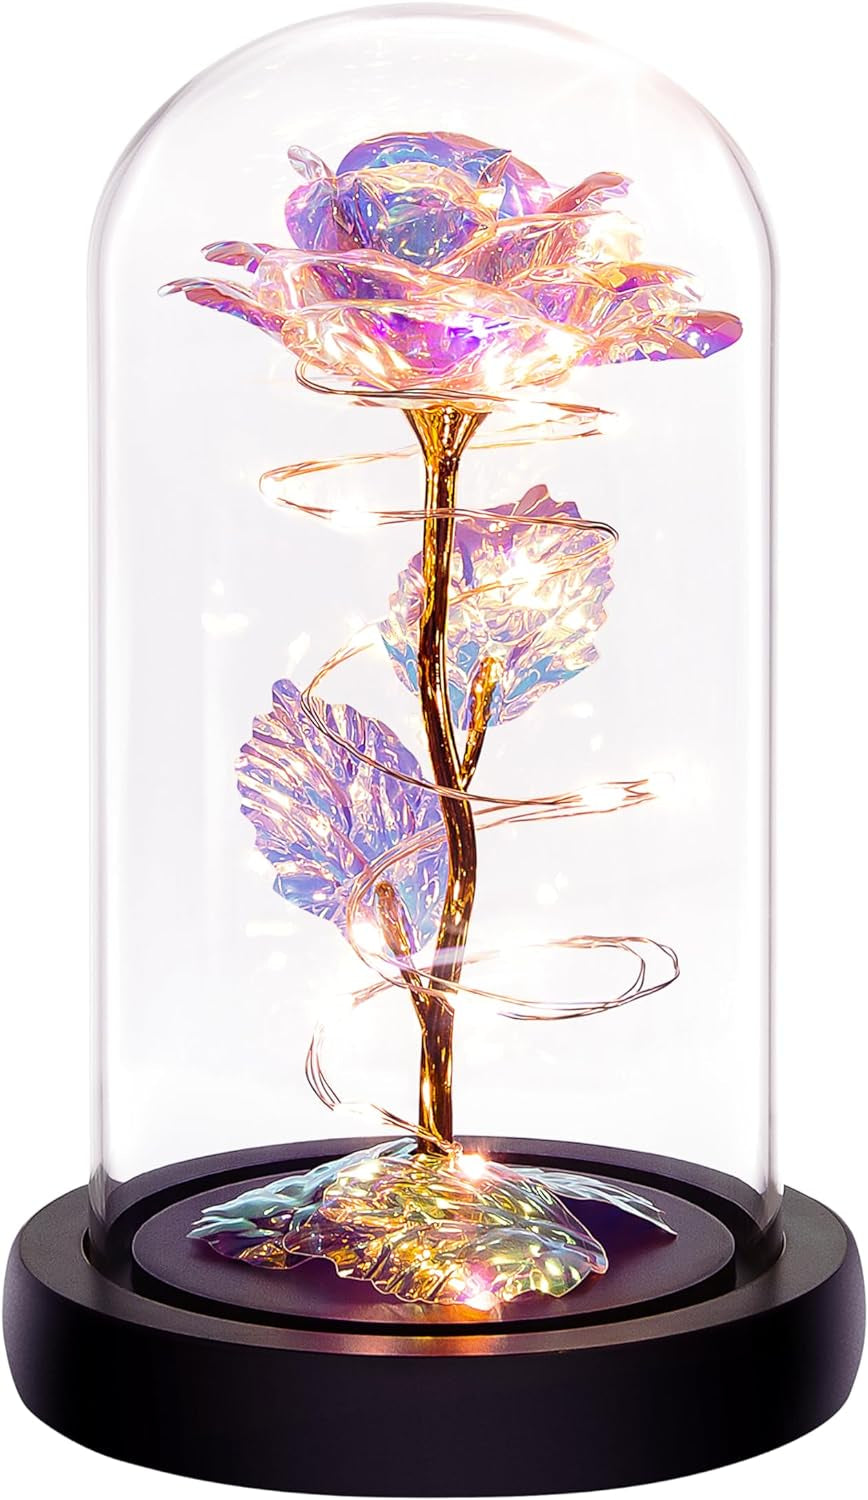 Everlasting Rainbow Rose in Glass Dome - LED Light - Growing Apex Family